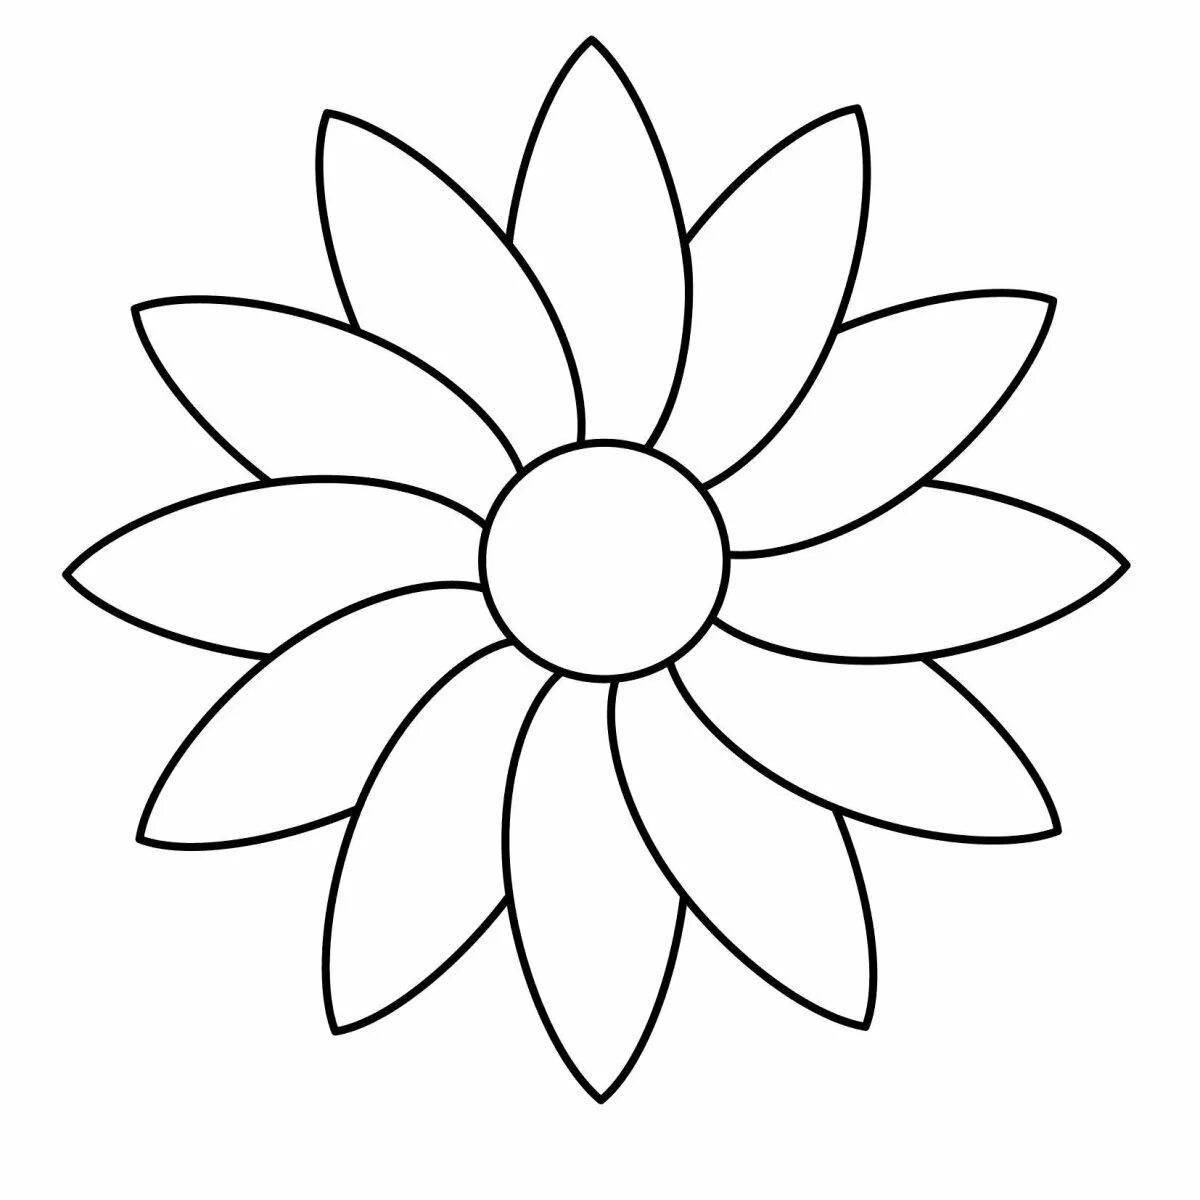 Shining flower coloring book for kids